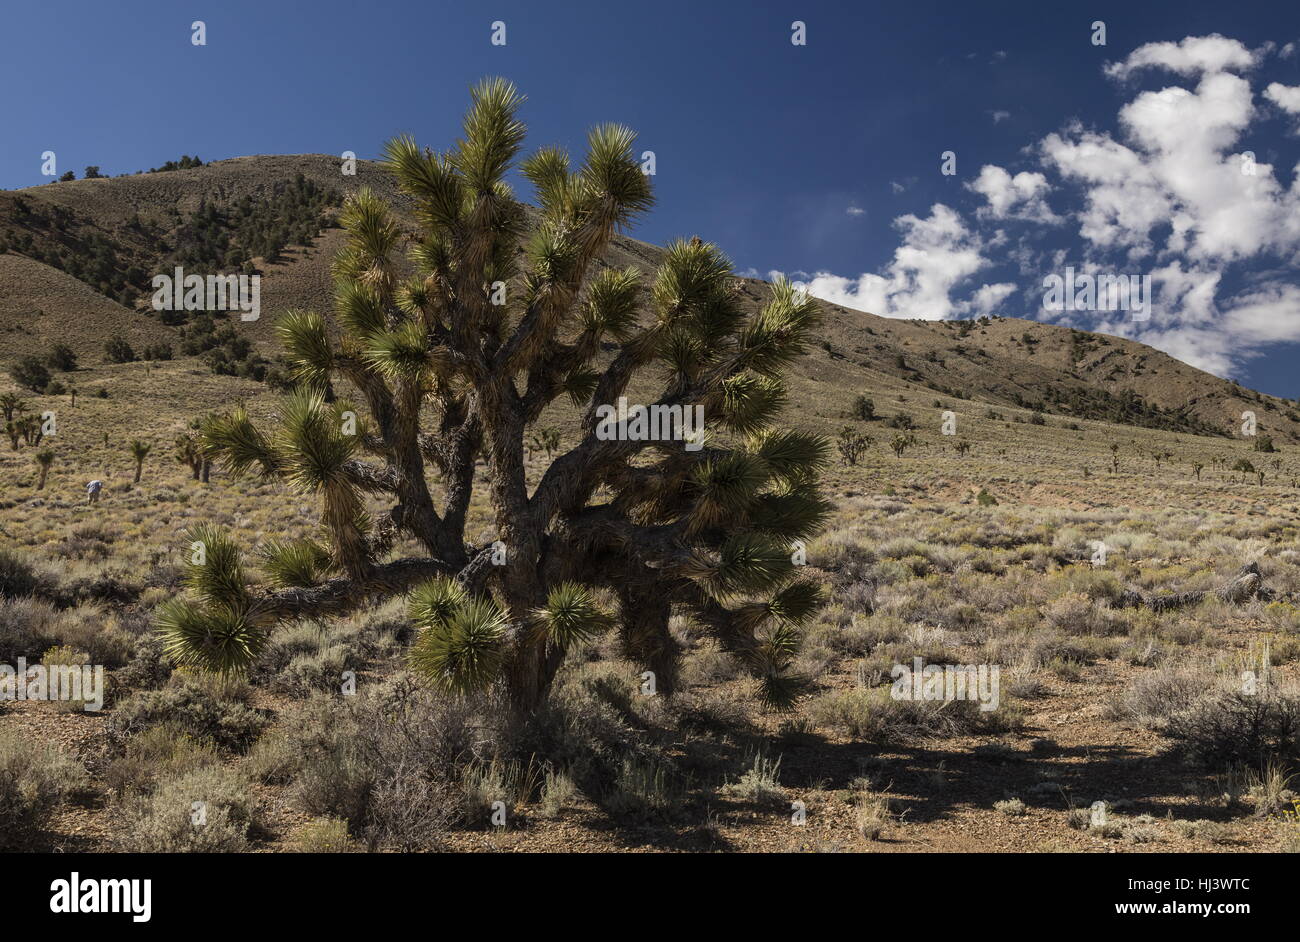 Joshua trees, Yucca brevifolia in the upper Eureka Valley, Death Valley National Park, California. Stock Photo